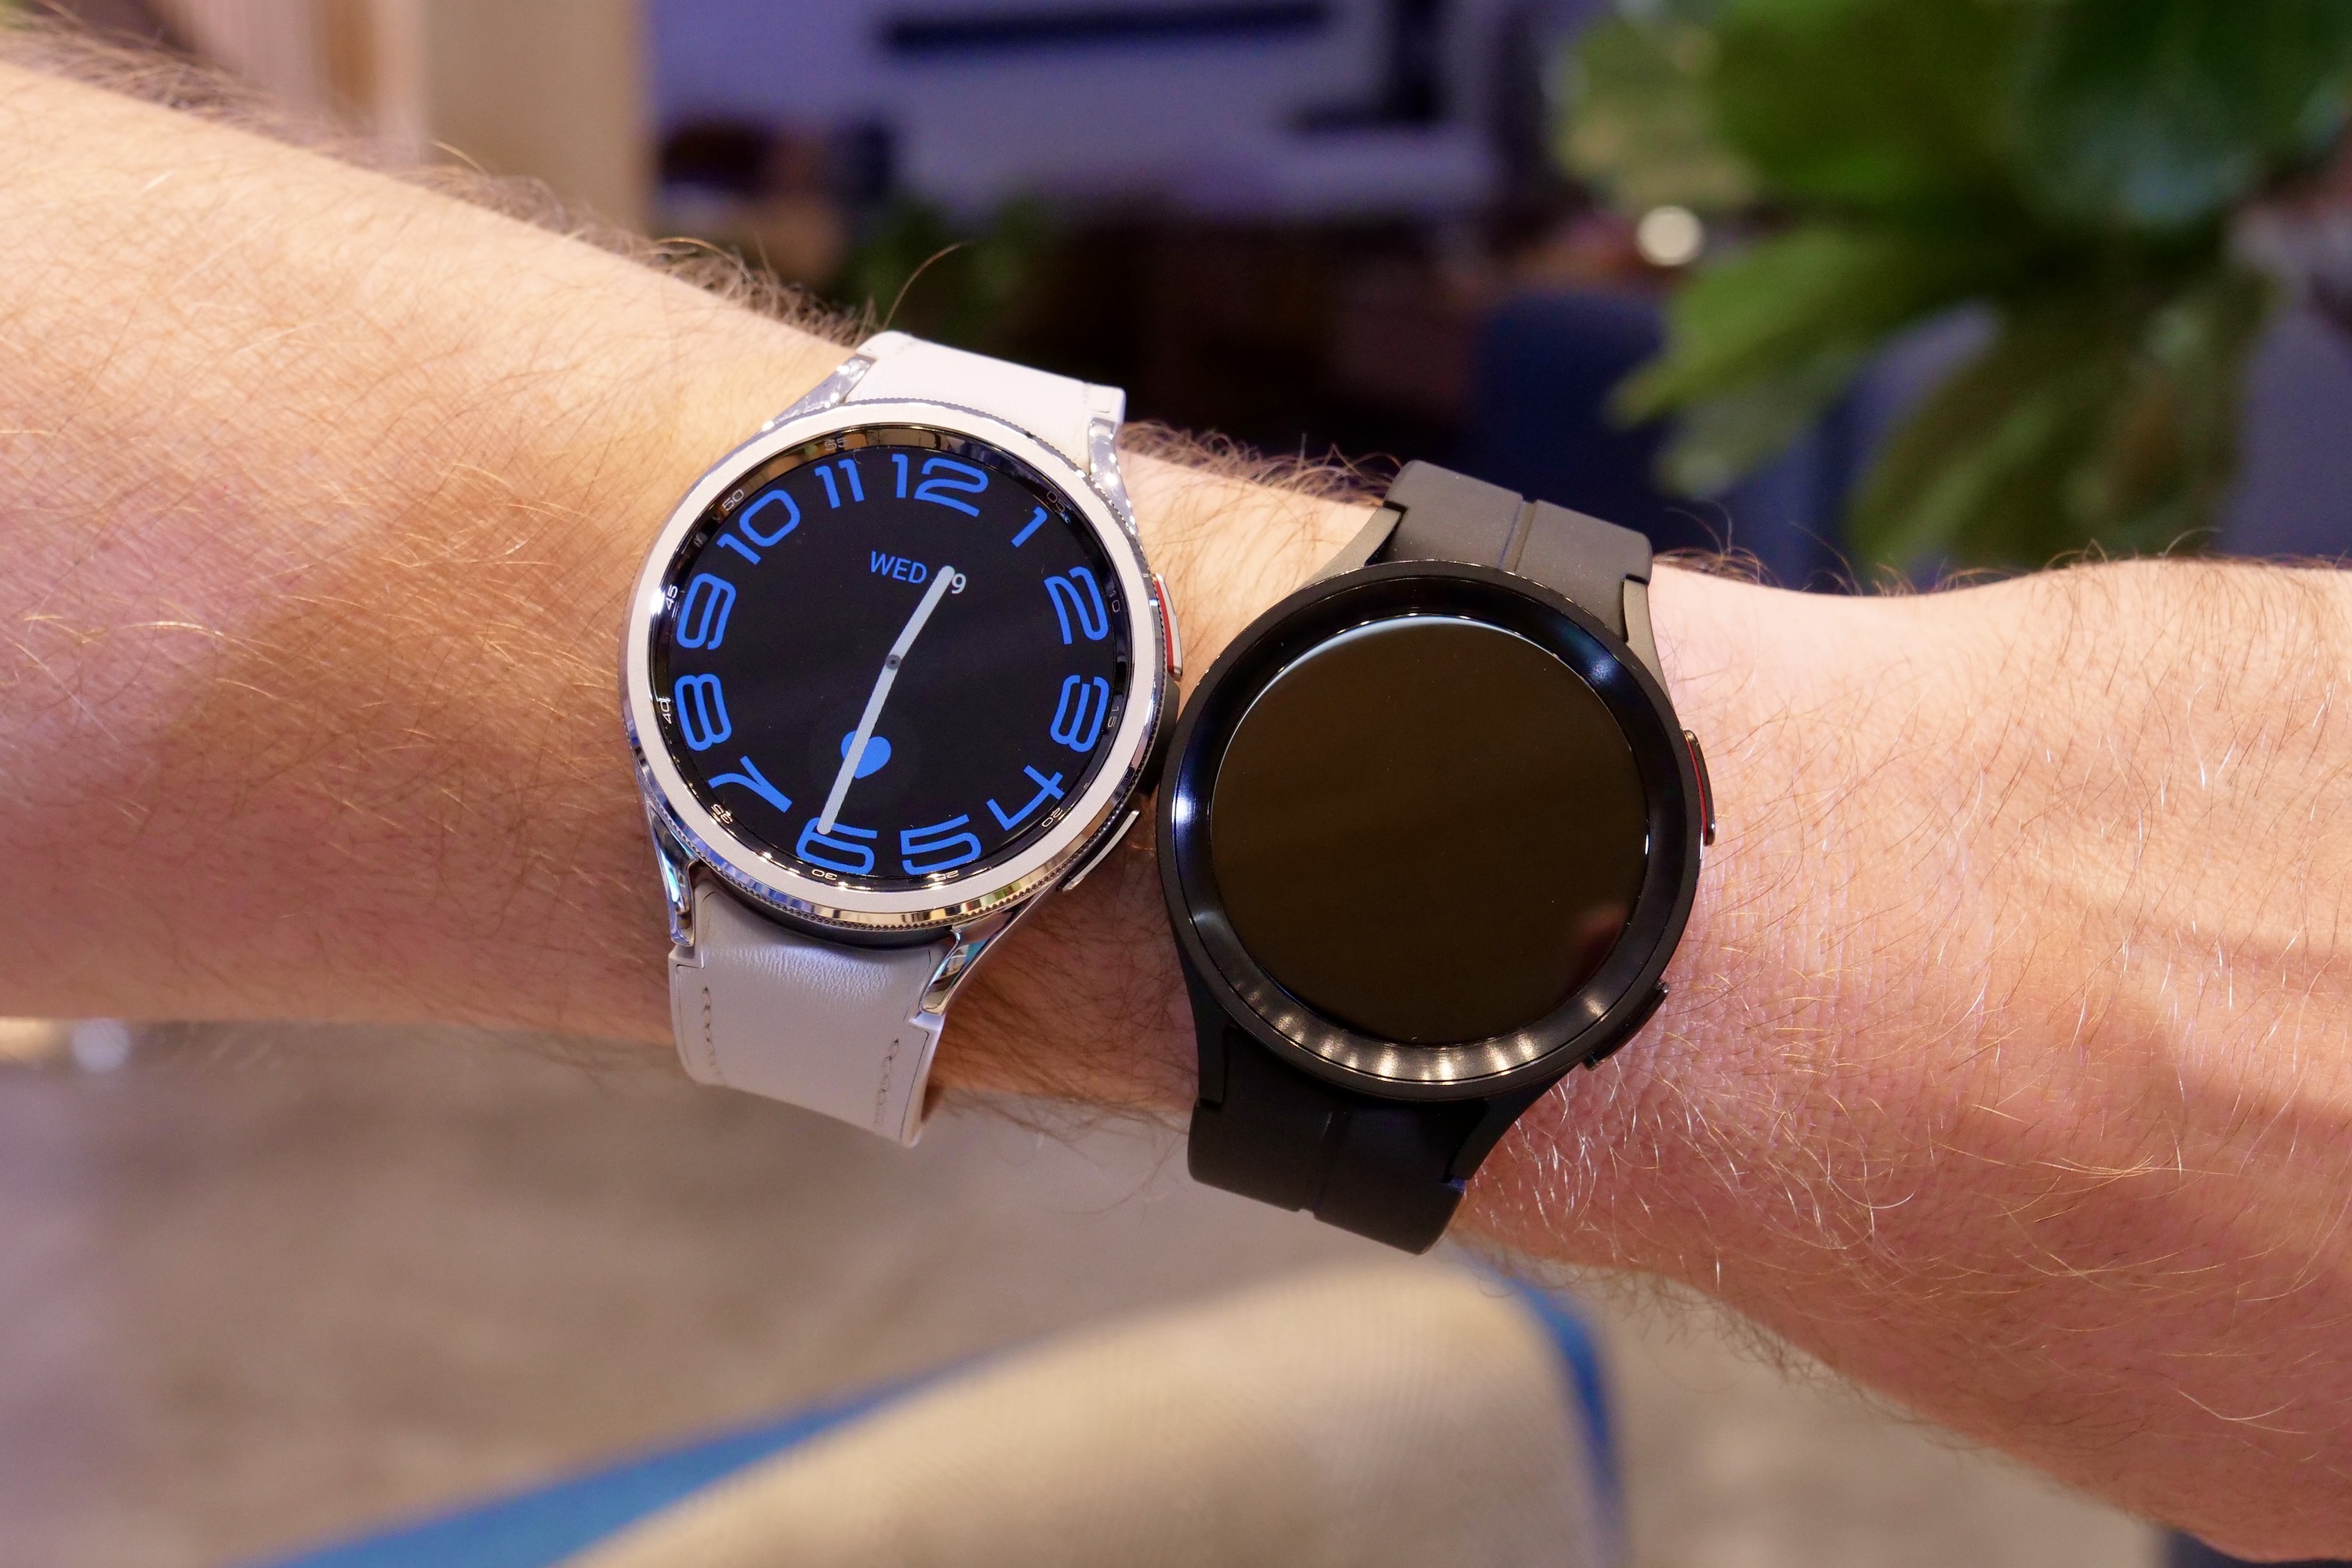 The Samsung Galaxy Watch 6 Classic and Galaxy Watch 5 Pro, side by side on a persons wrist.